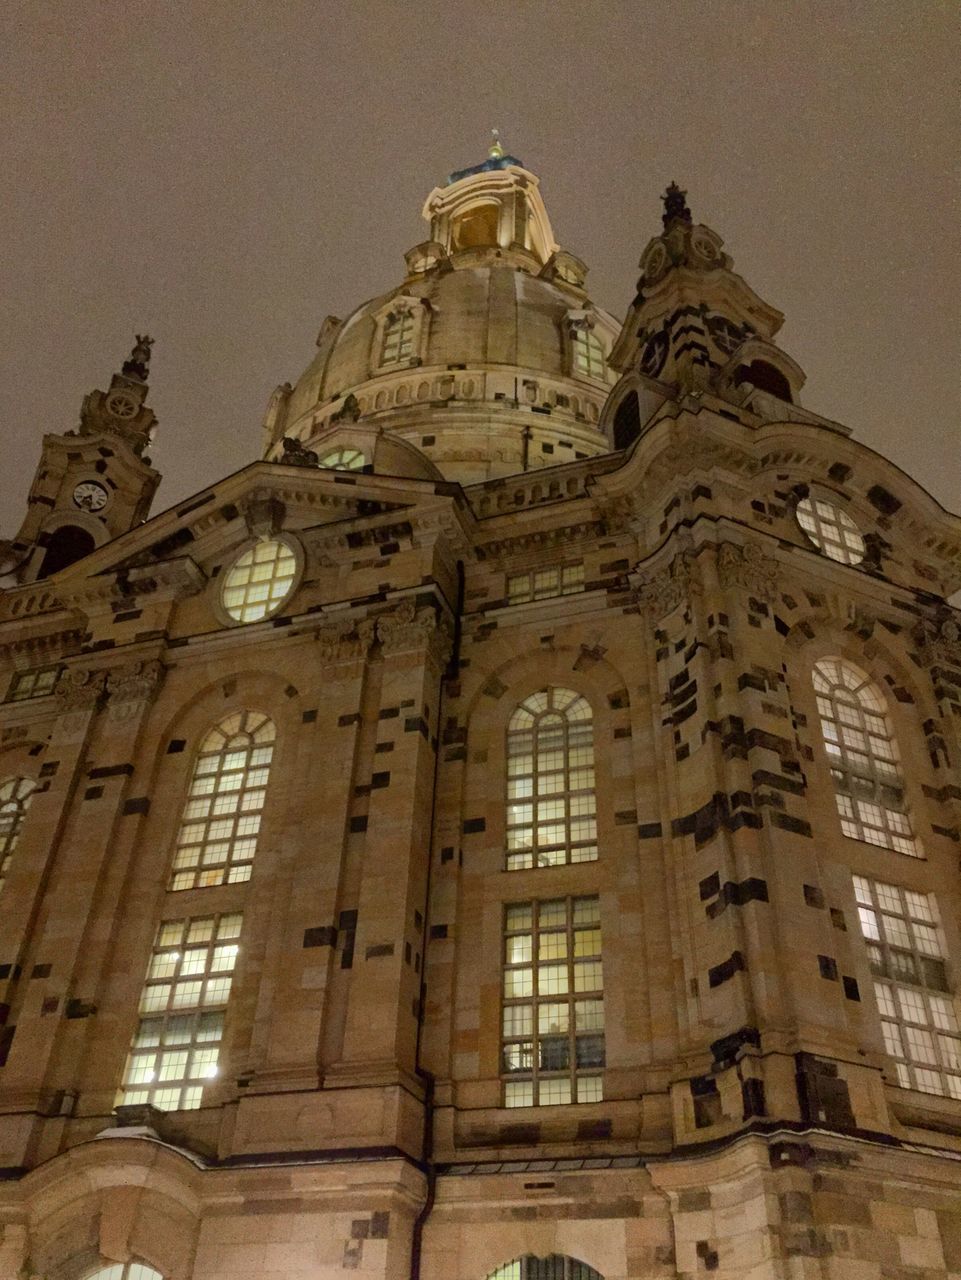 LOW ANGLE VIEW OF ILLUMINATED CATHEDRAL